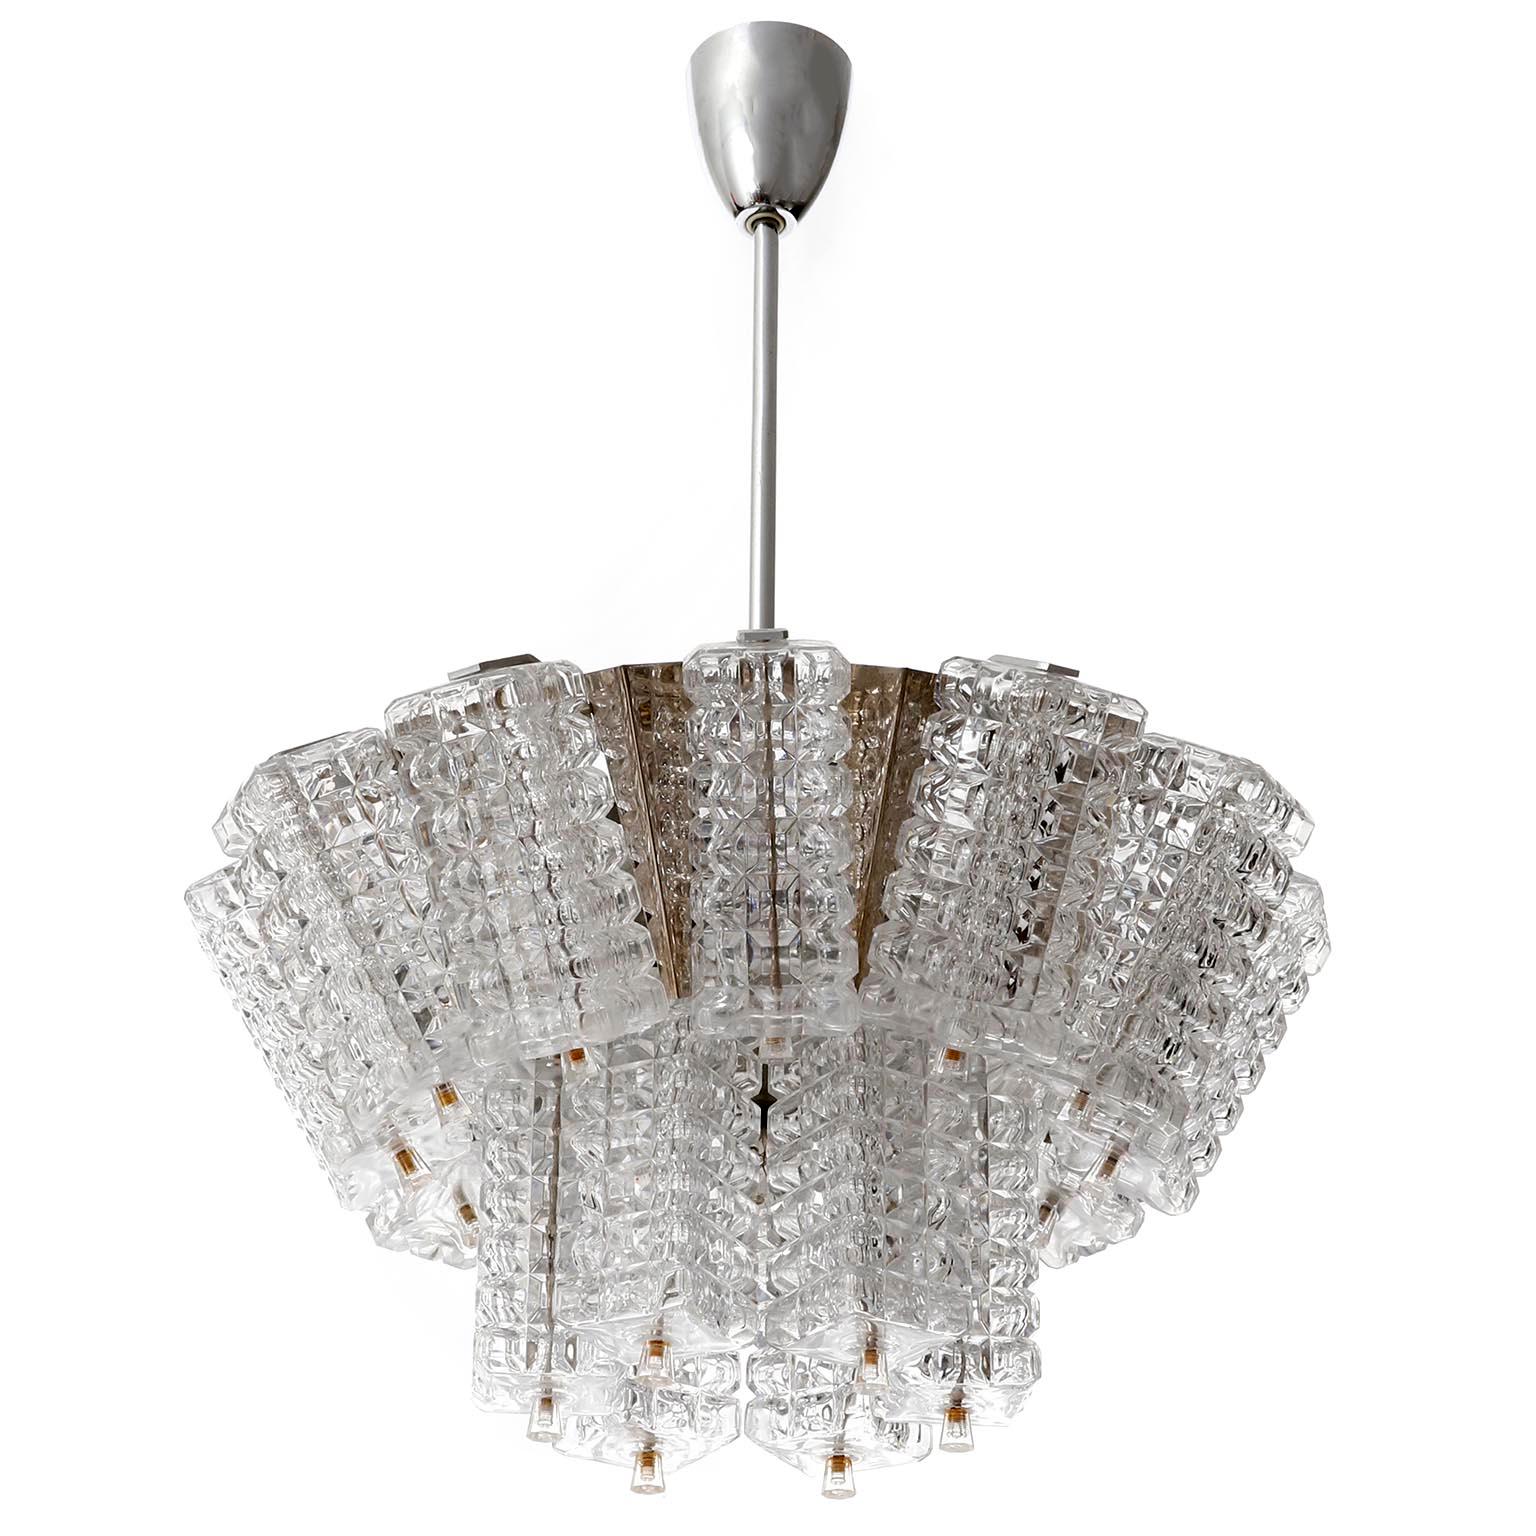 Brutalist One of Three Chandeliers Pendant Lights by Austrolux, Chrome Glass, Austria 1960 For Sale